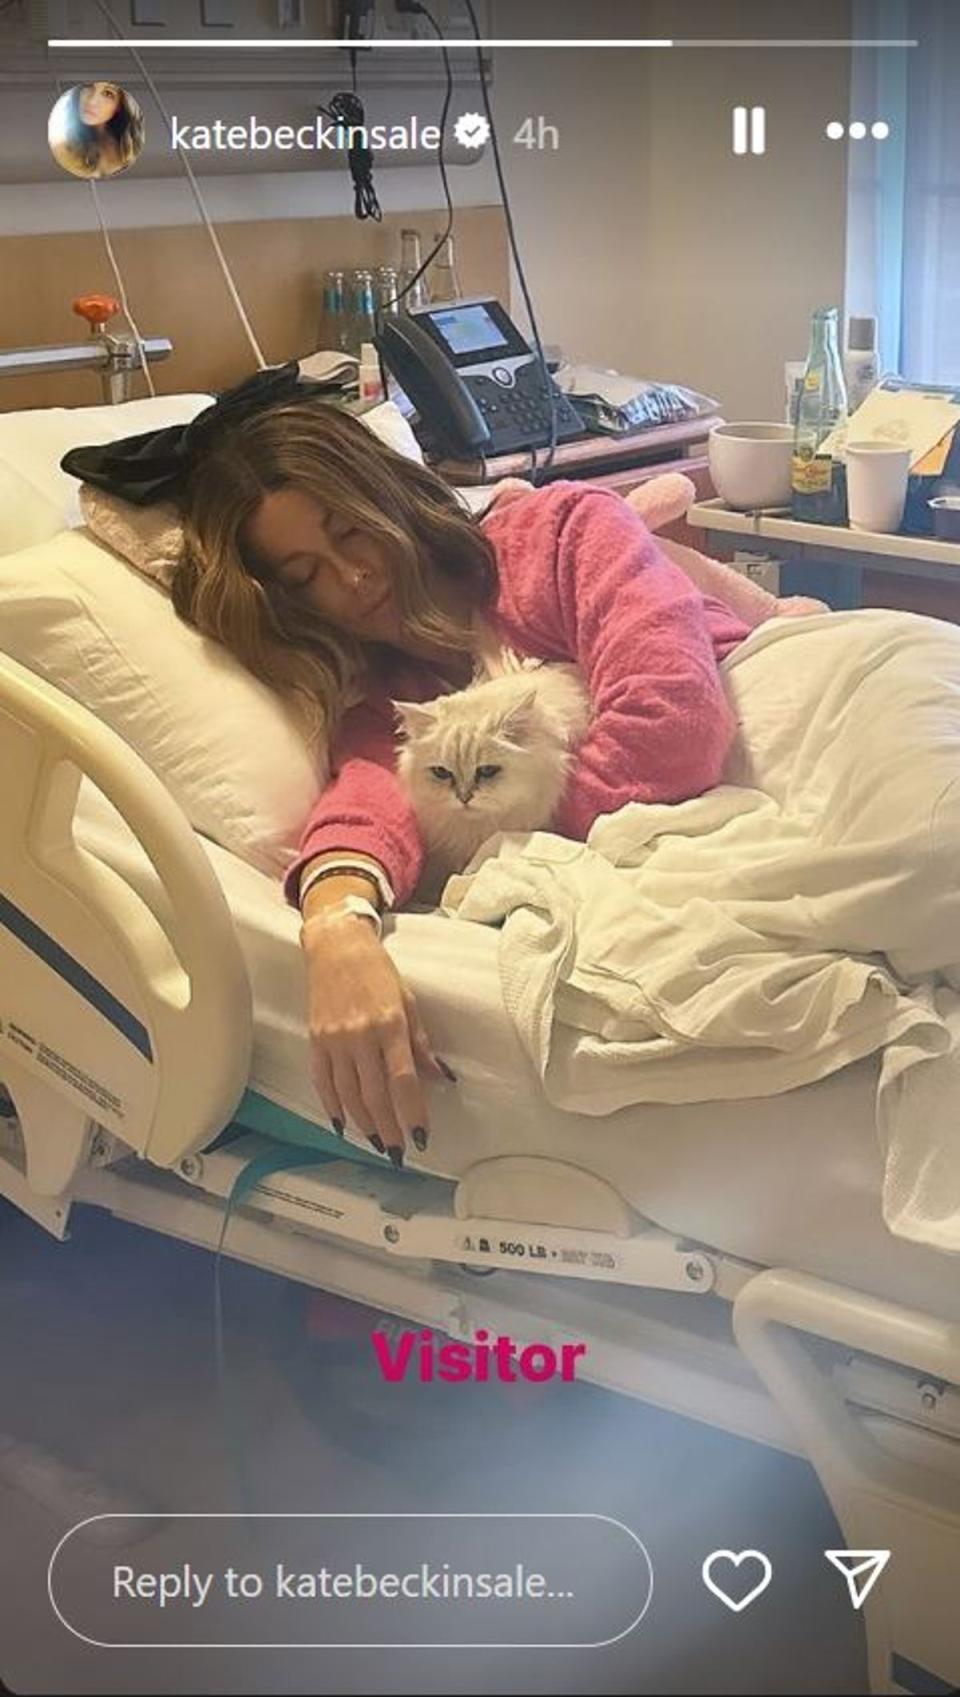 Kate Beckinsale shared a picture of herself in a hospital bed with her cat (Instagram)